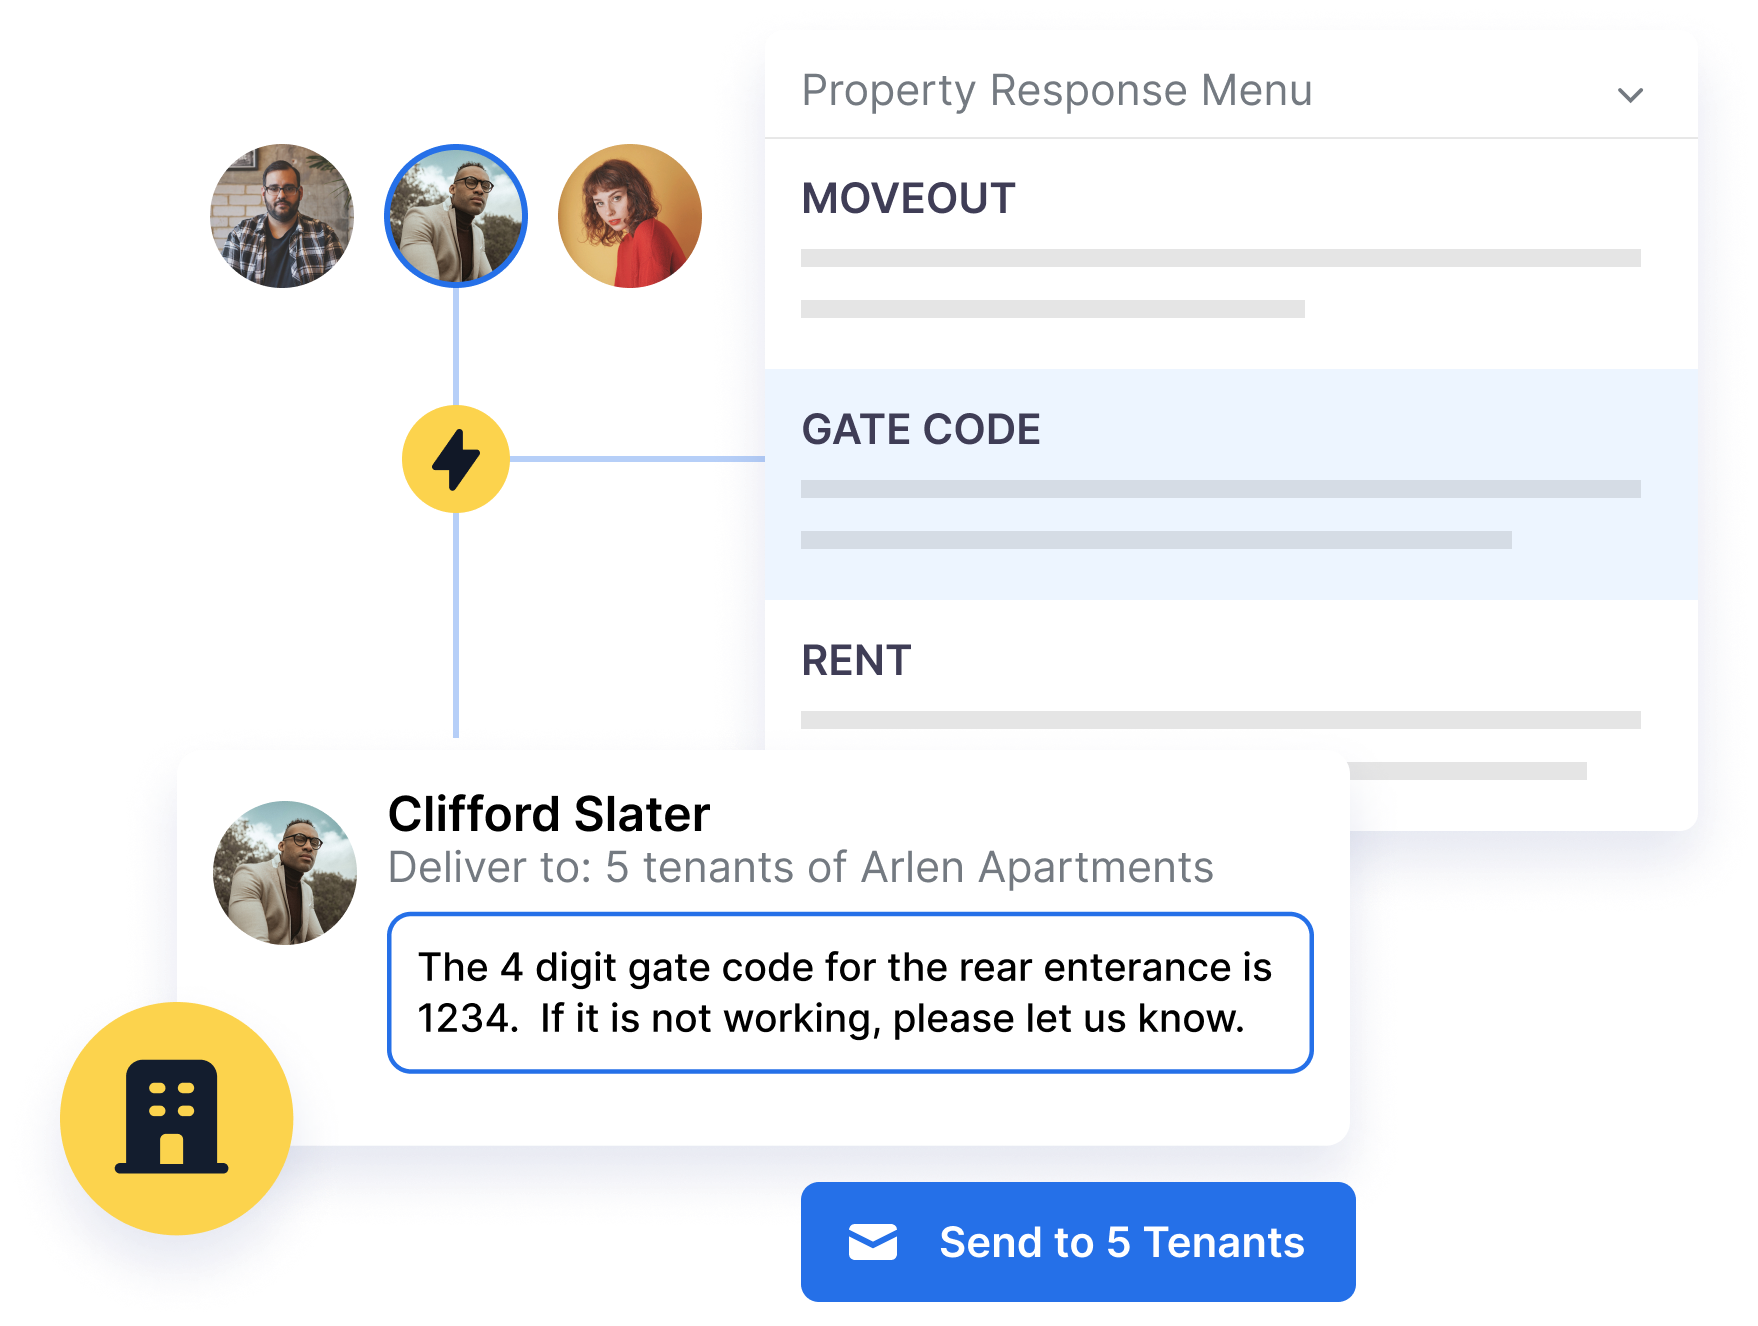 Automated property based communication examples such as property response menu, auto-replies and property announcements.